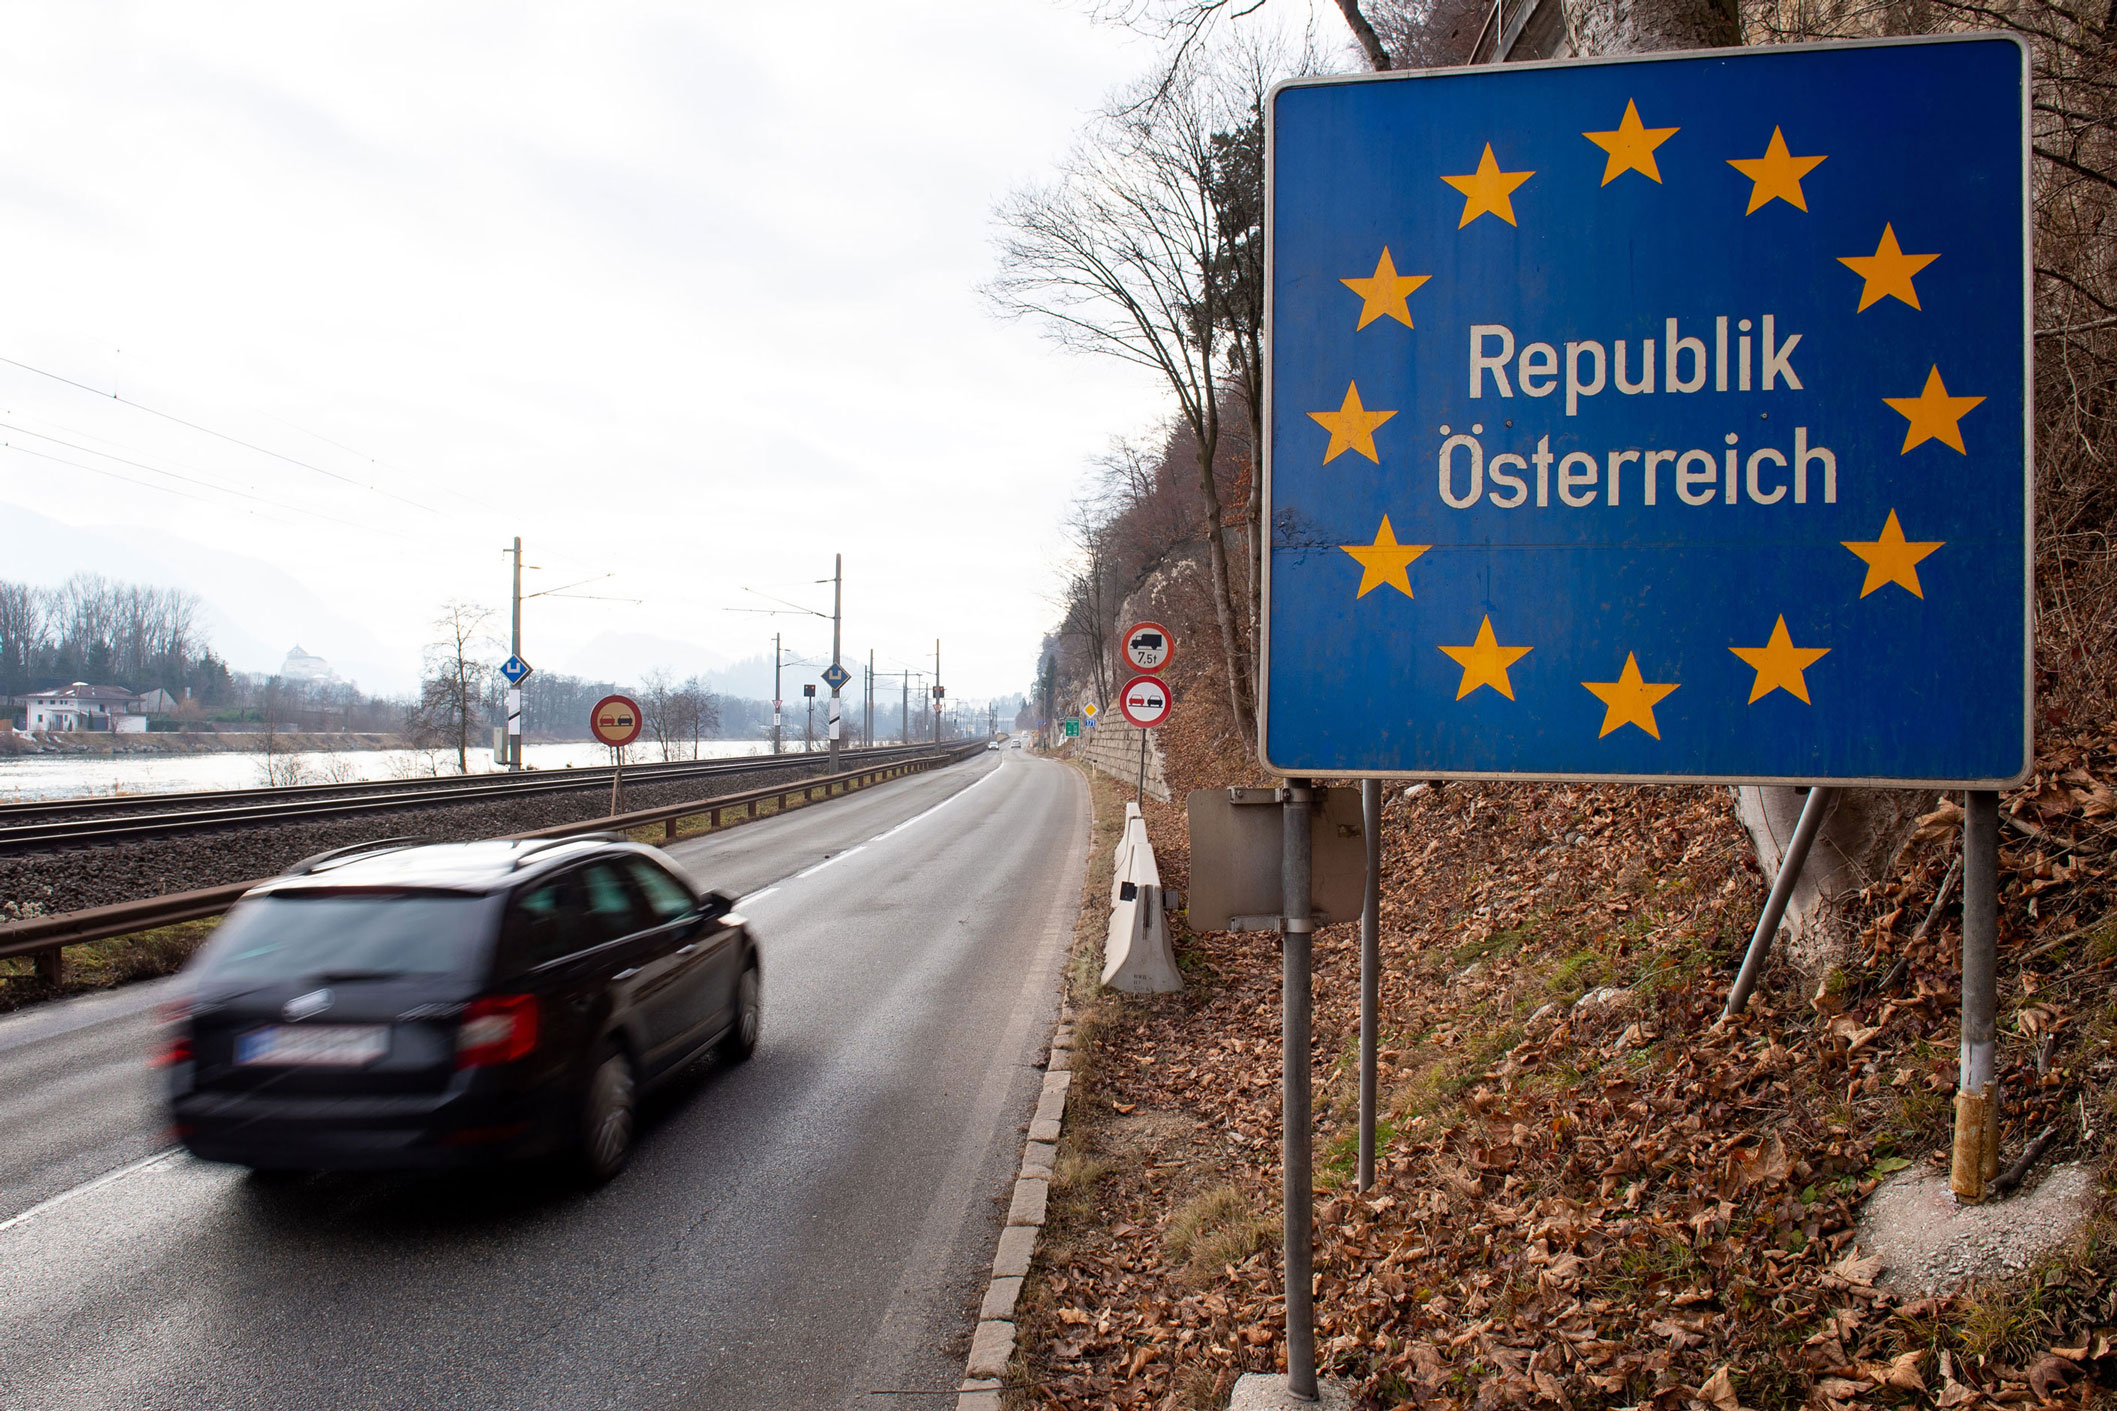  A car passes the border between Kiefersfelden, Germany and Kufstein, Austria on December 20, 2021.